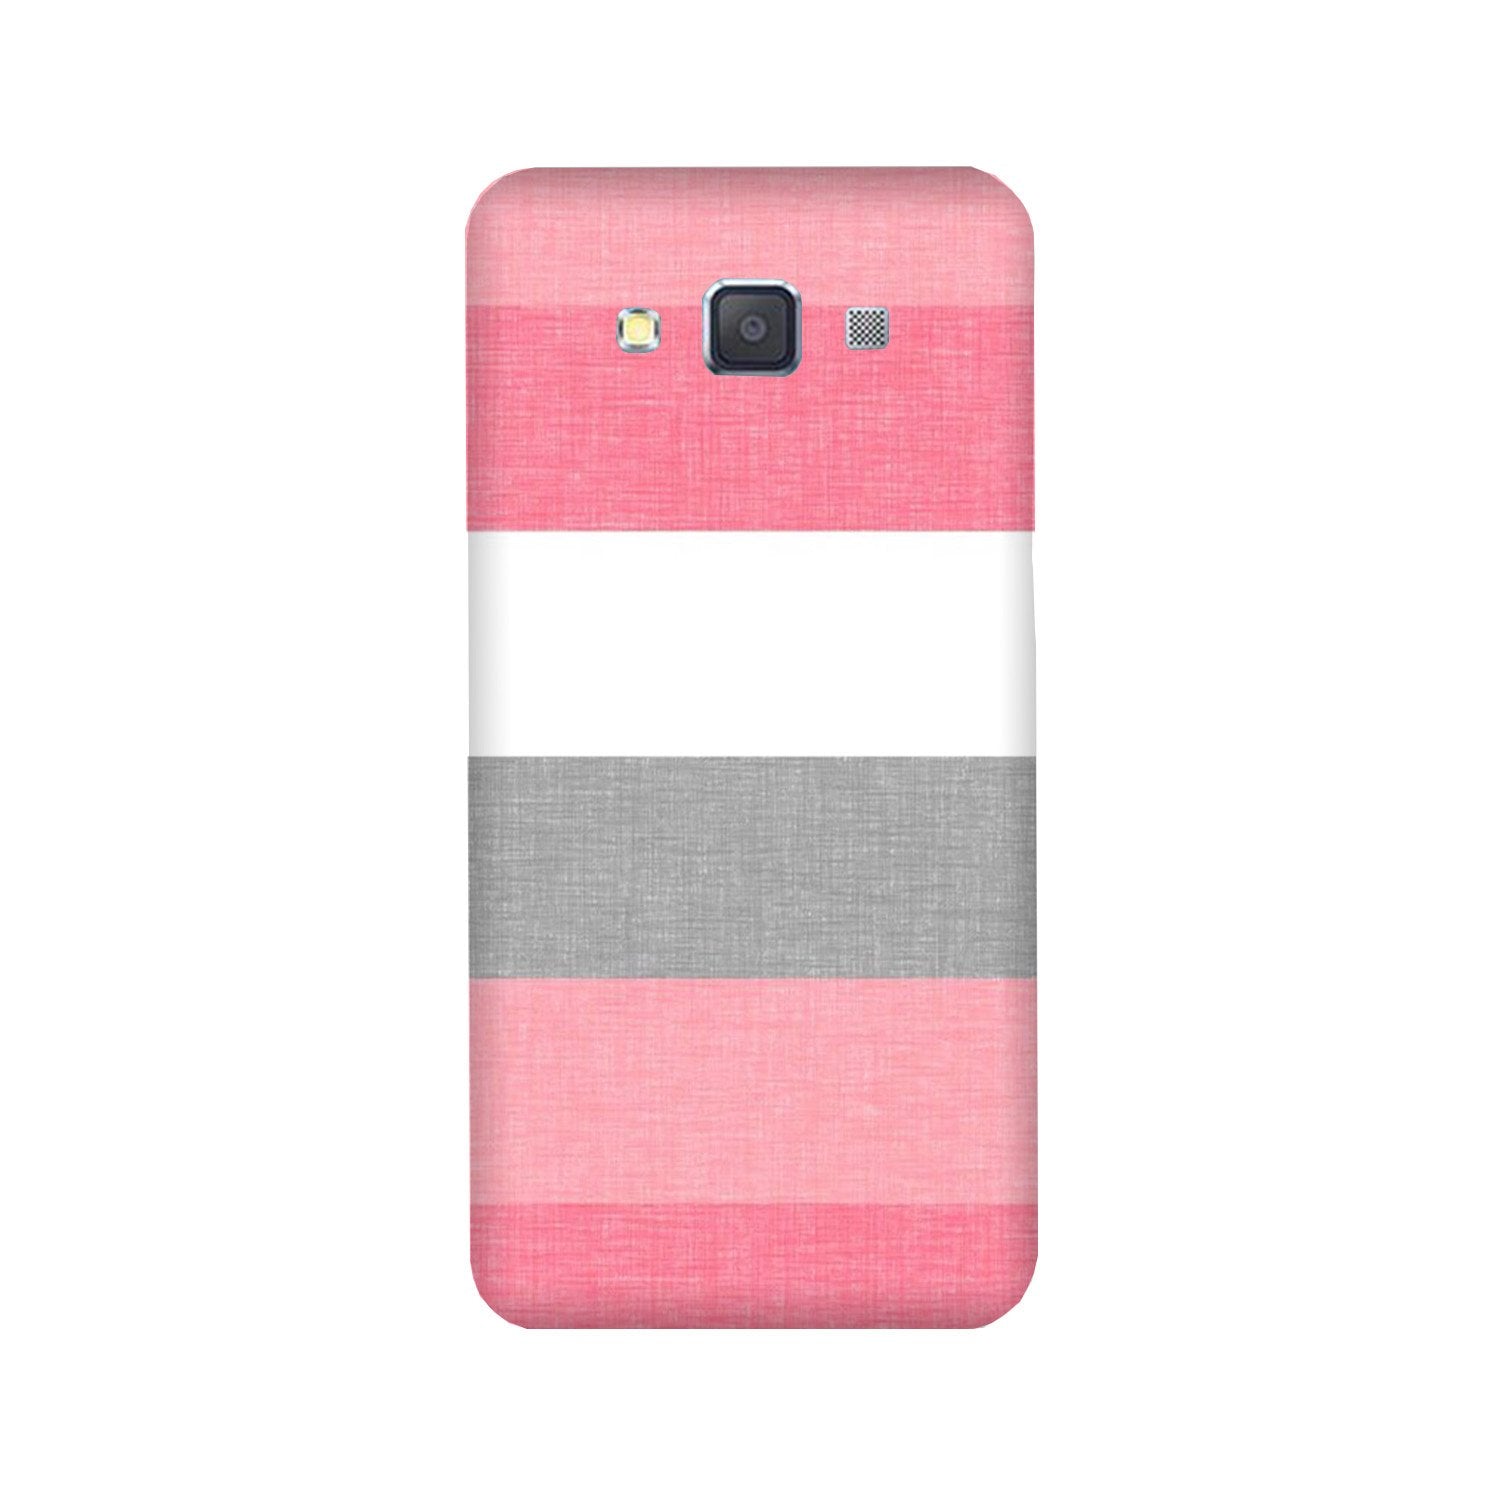 Pink white pattern Case for Galaxy E7